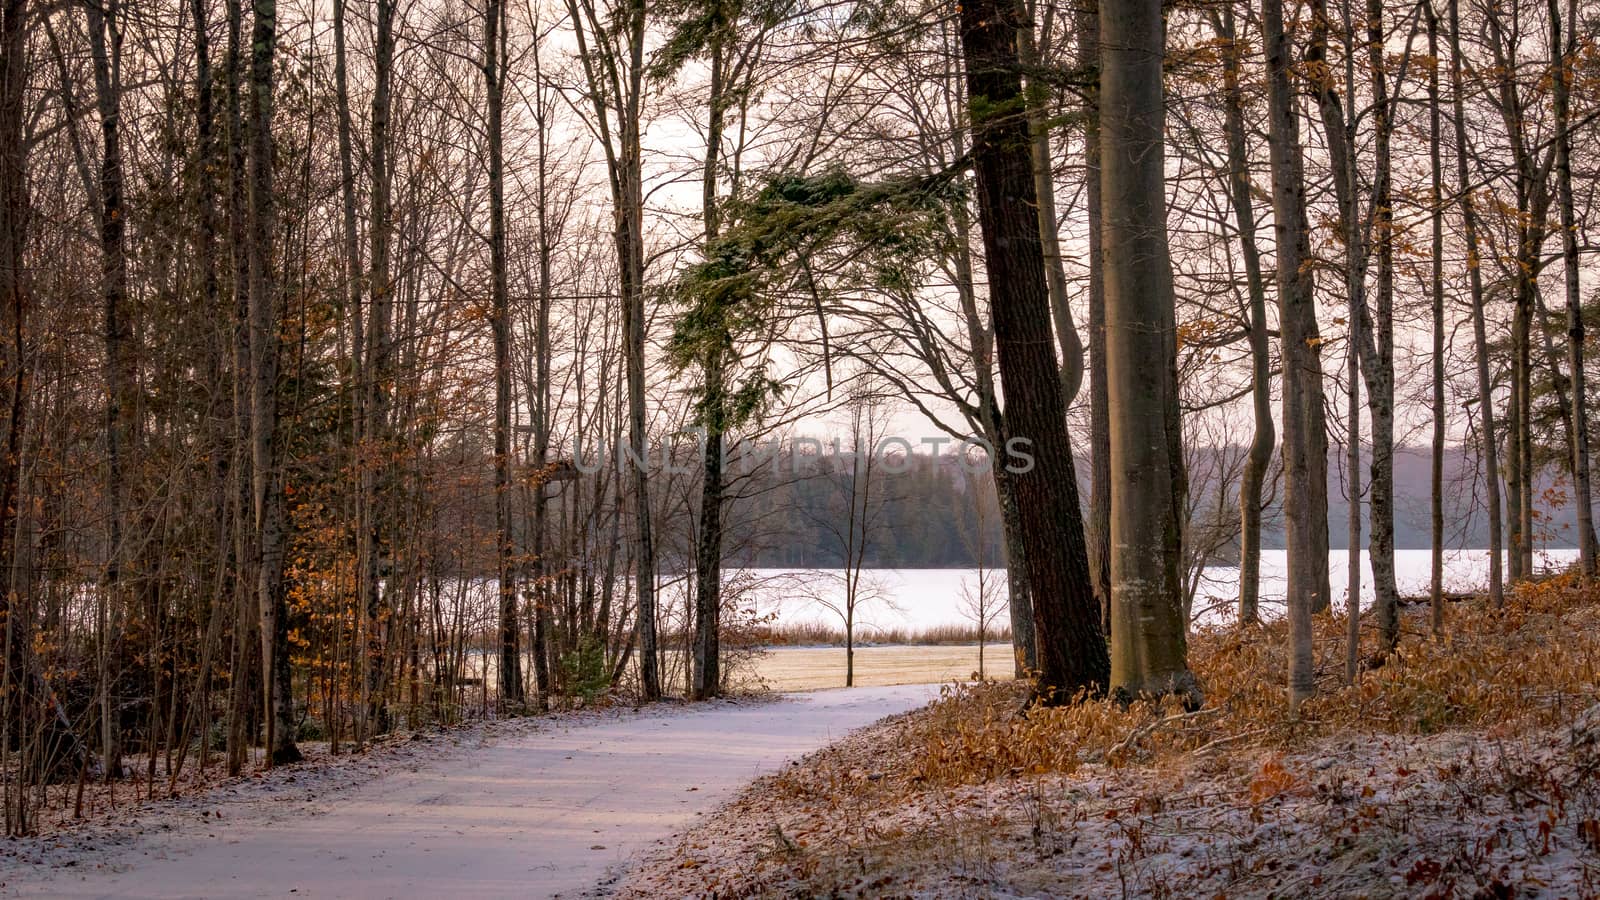 A snowy rural road curves towards the lake on a waterfront property in winter.